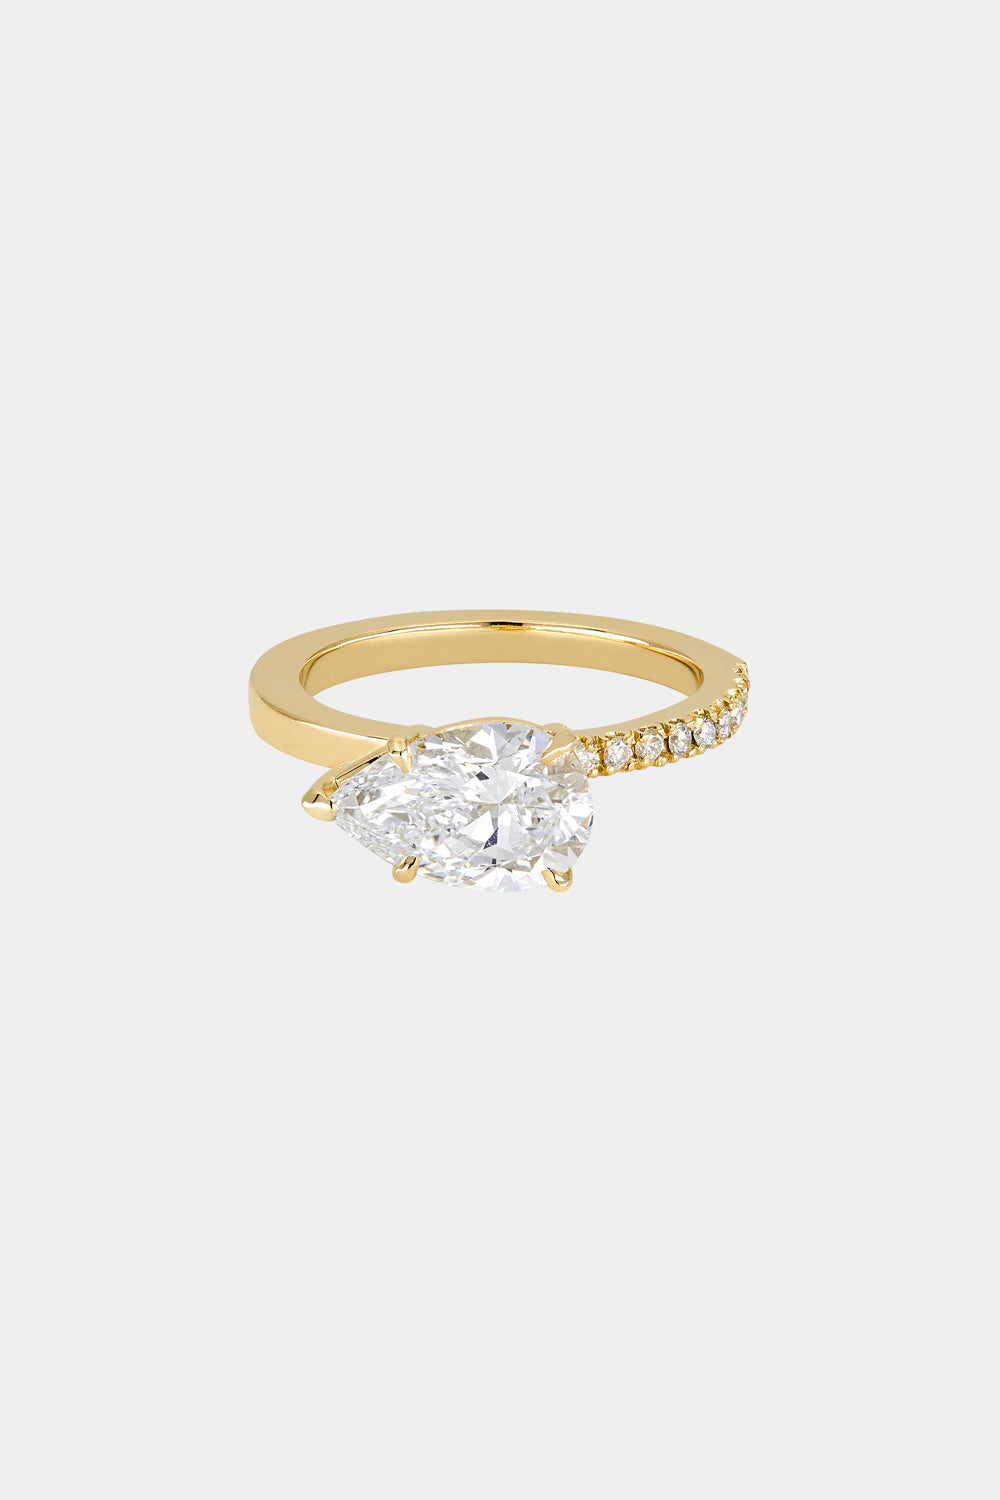 East West Pear Diamond Ring | 18K Gold